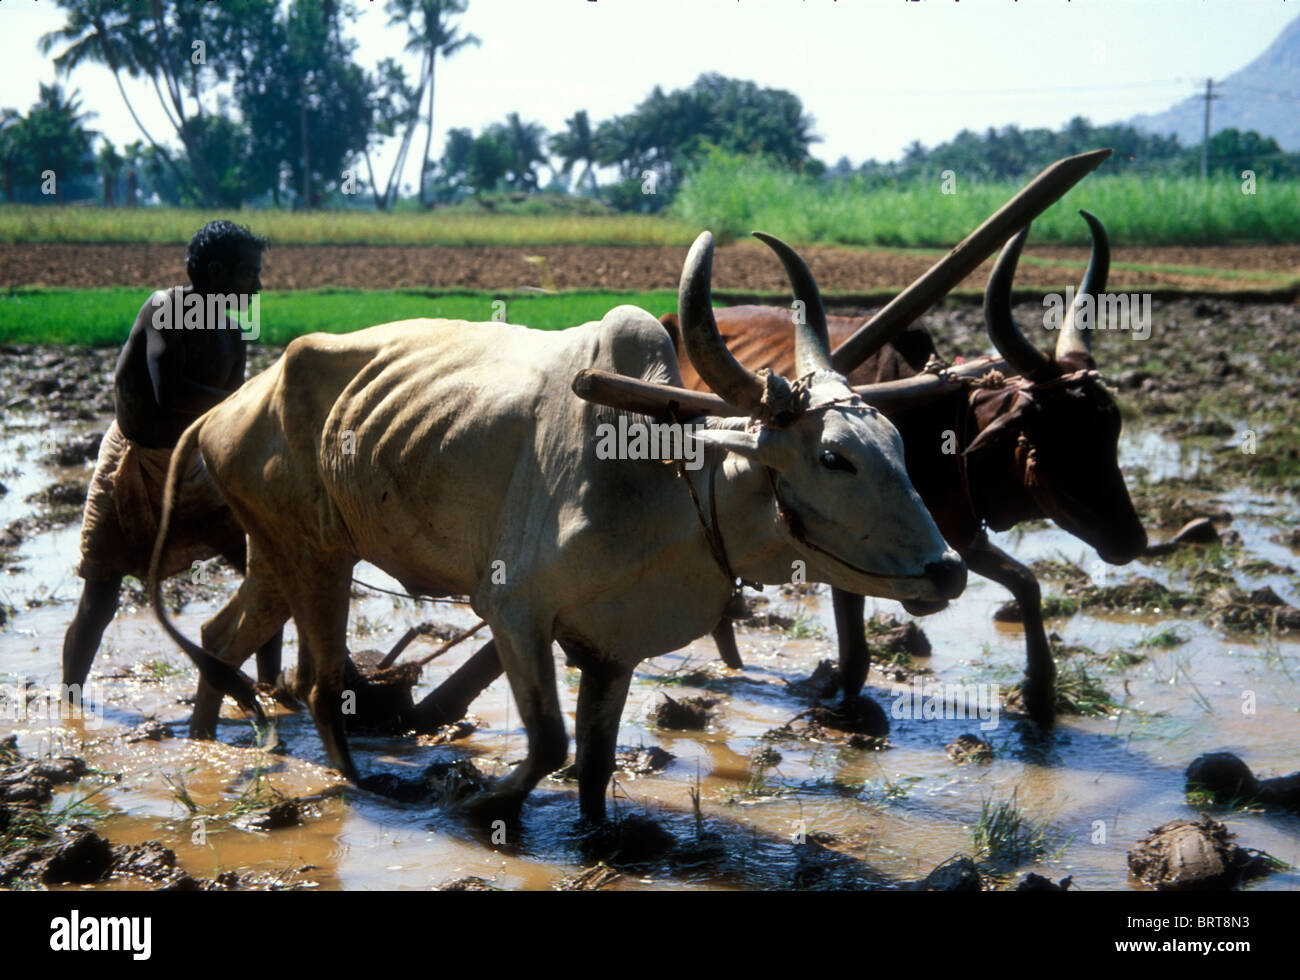 Farmer with oxen ploughing rice field in Tamil Nadu India, 2004 Stock Photo